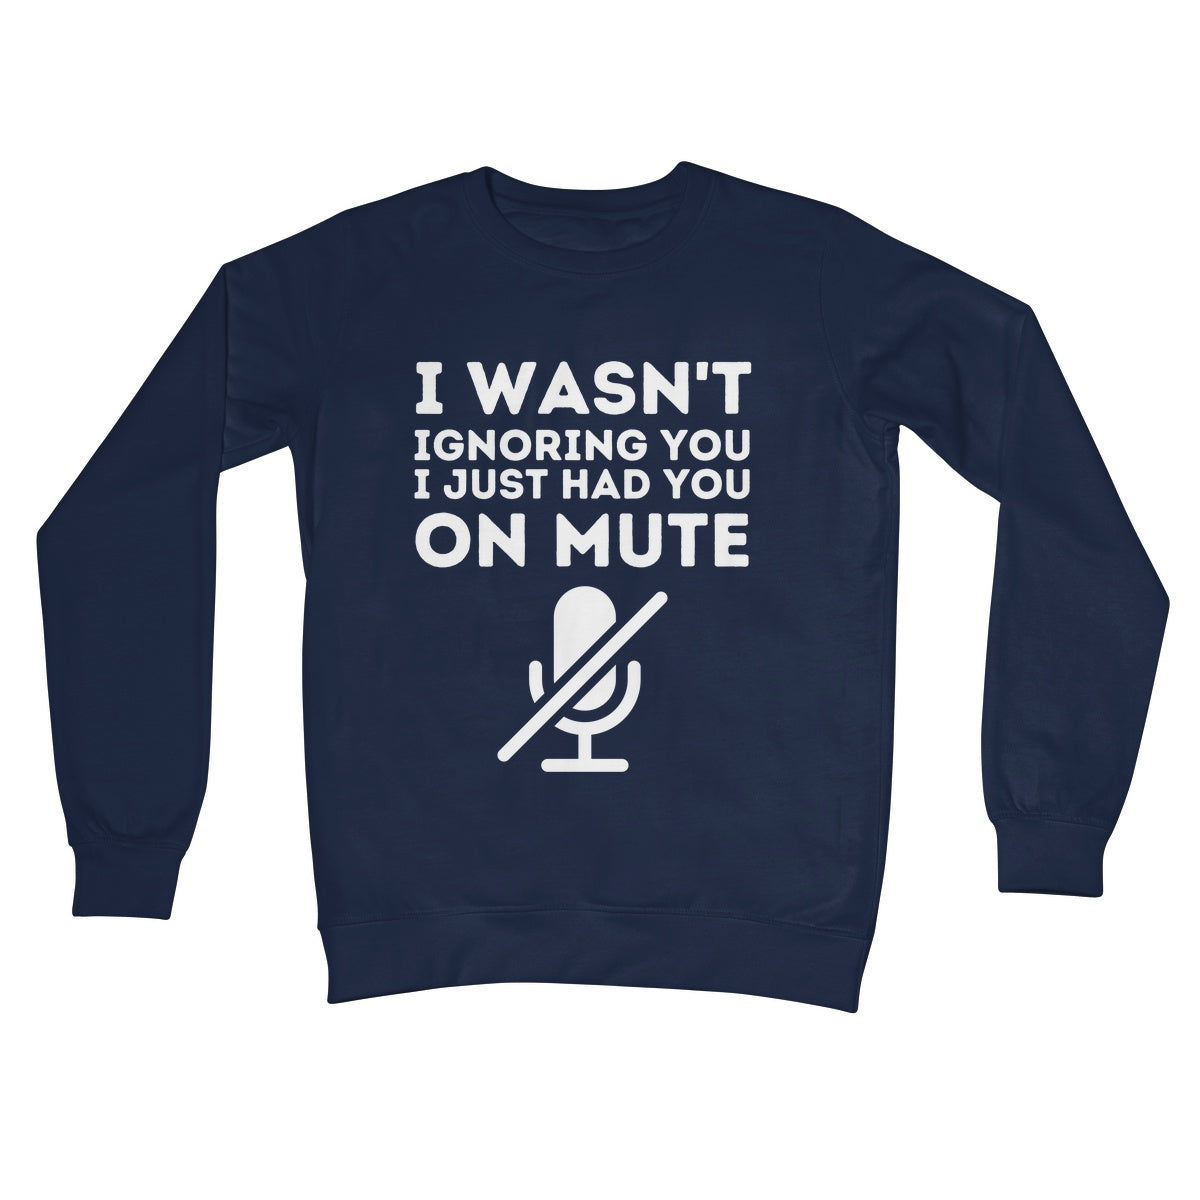 I just had you on mute jumper navy